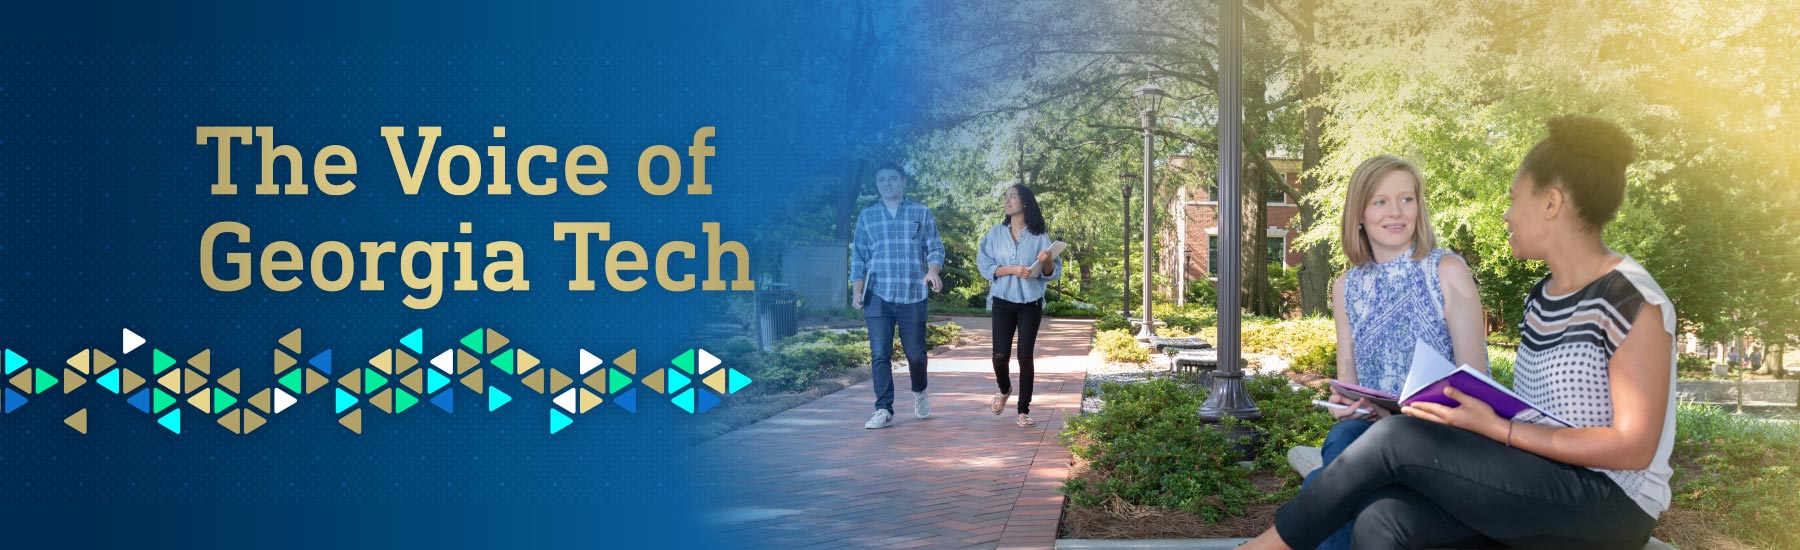 students talking on campus with text, "The Voice of Georgia Tech"